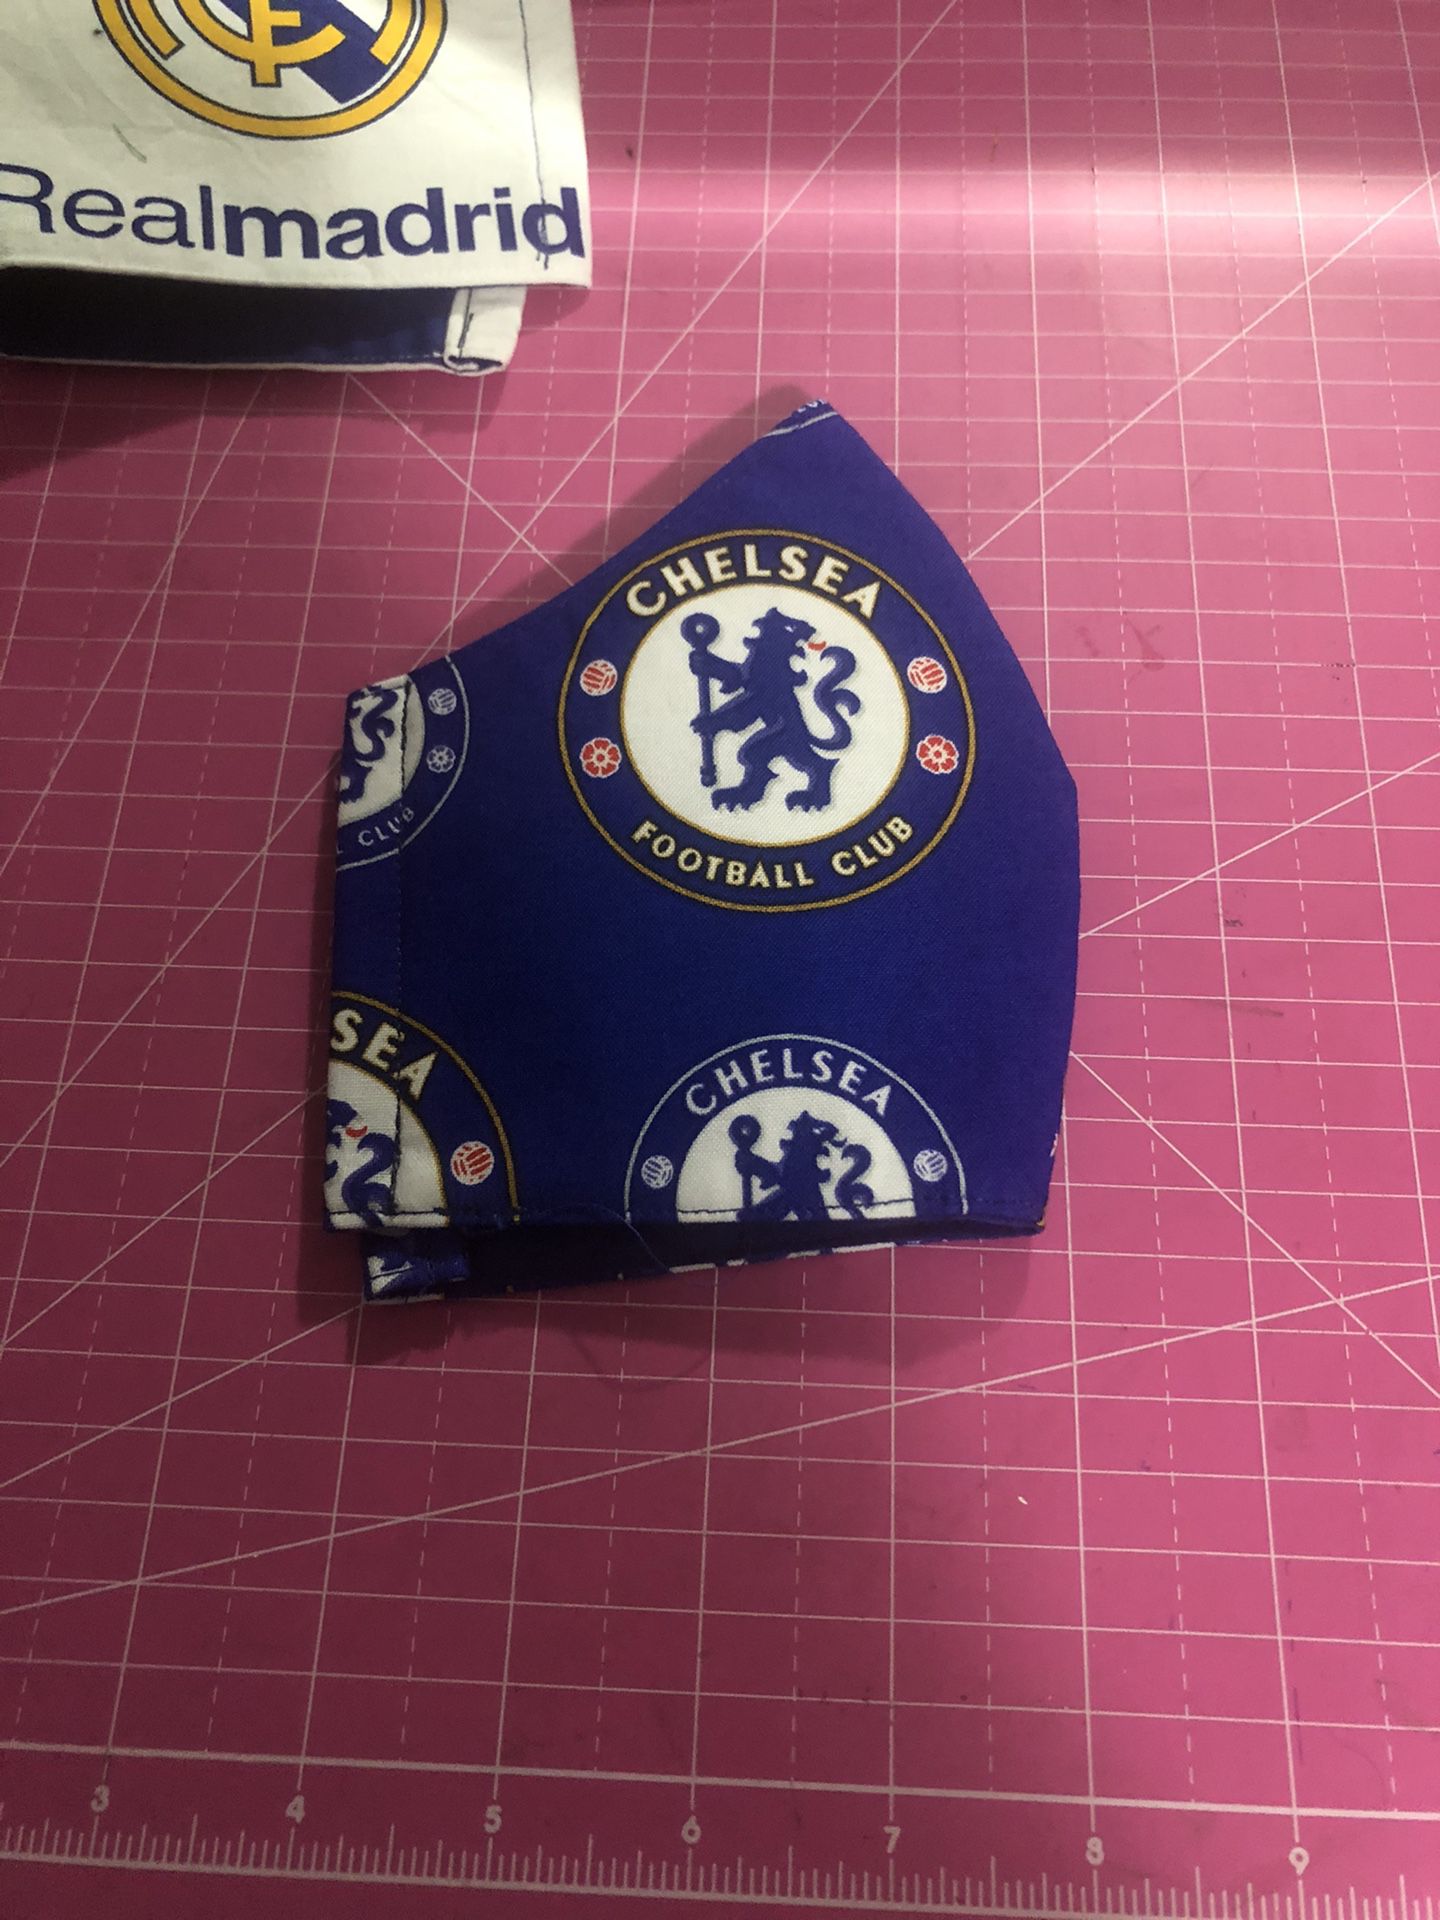 Chelsea adult face/covering mask